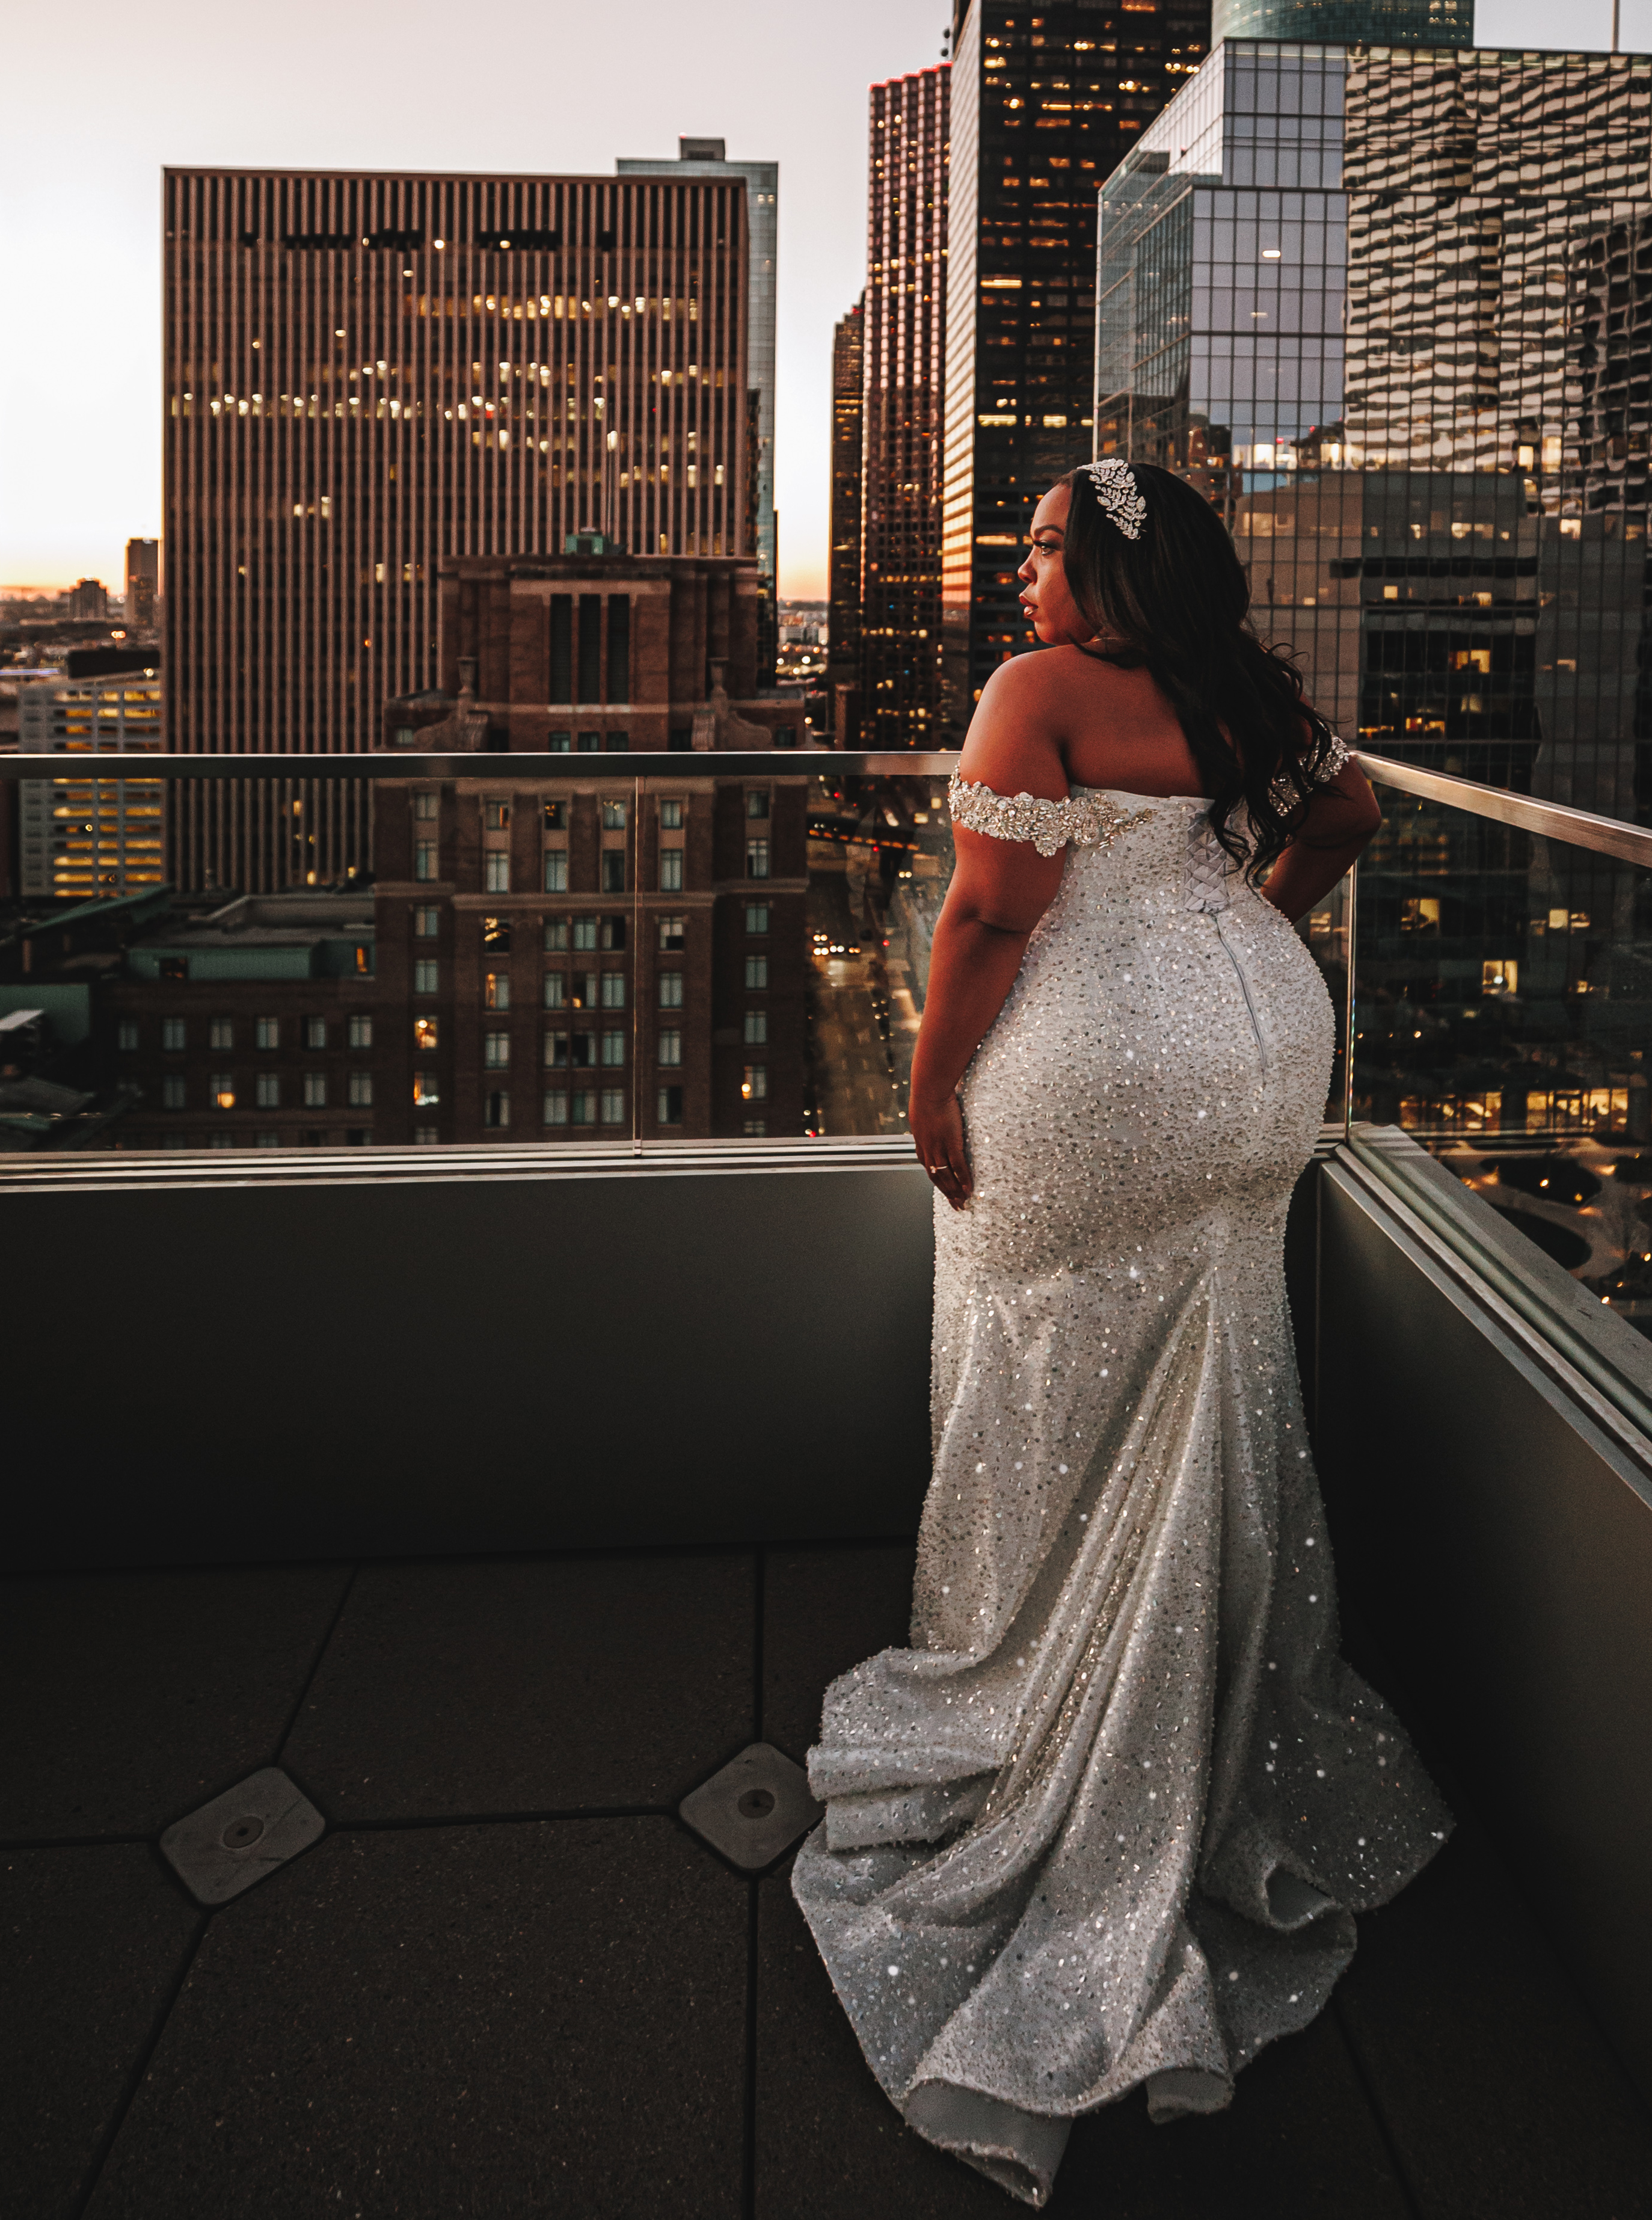 Ashley Turner is wearing her wedding gown while on a balcony overlooking the Houston skyline during her bridal shoot at sunset.